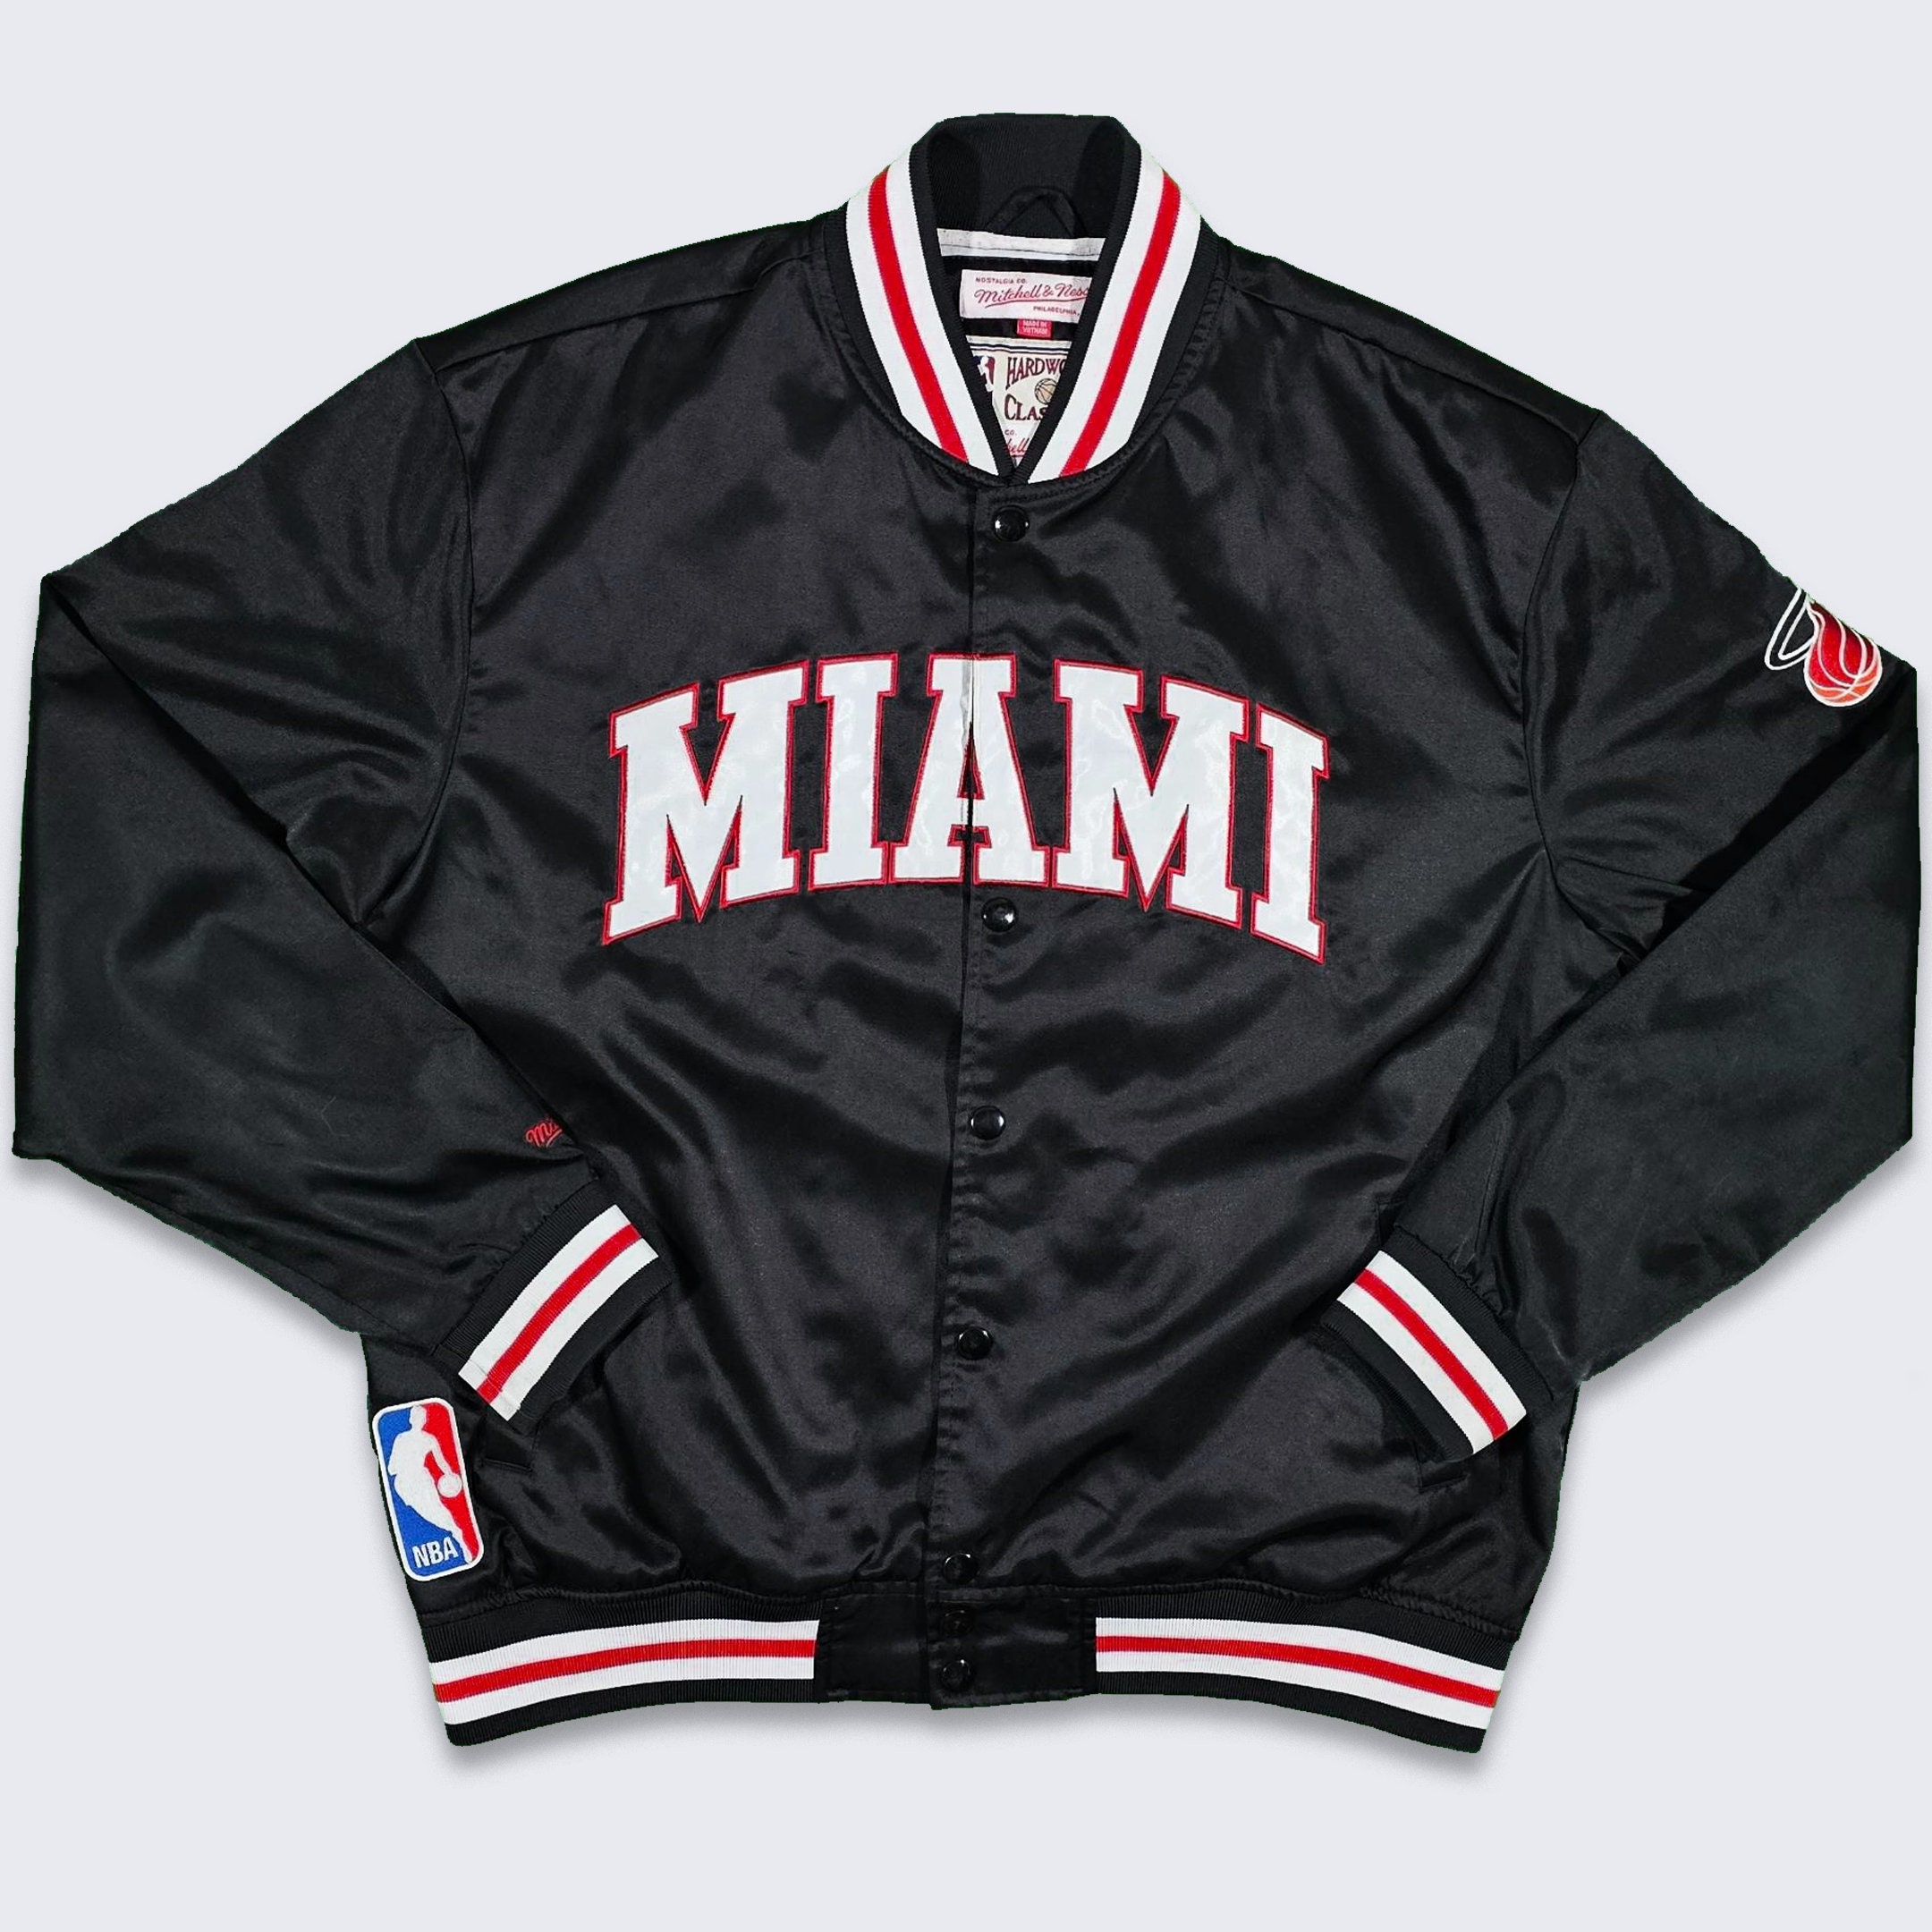 Red NBA Miami Heat Baseball Jersey Gift For Basketball Fans